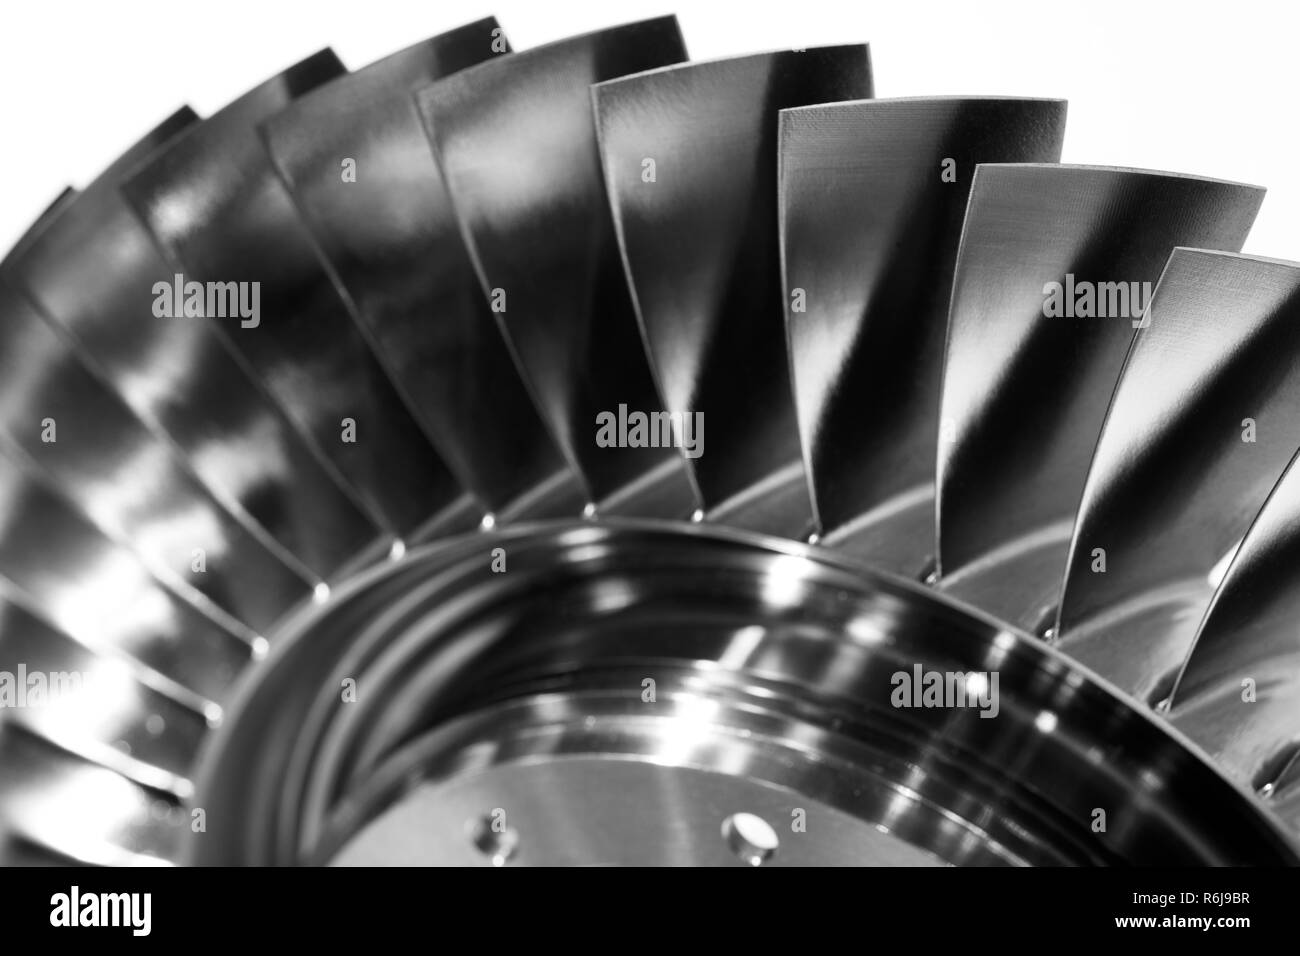 Steel blades of turbine propeller. Close-up view. In B/W. Selected focus on foreground Stock Photo